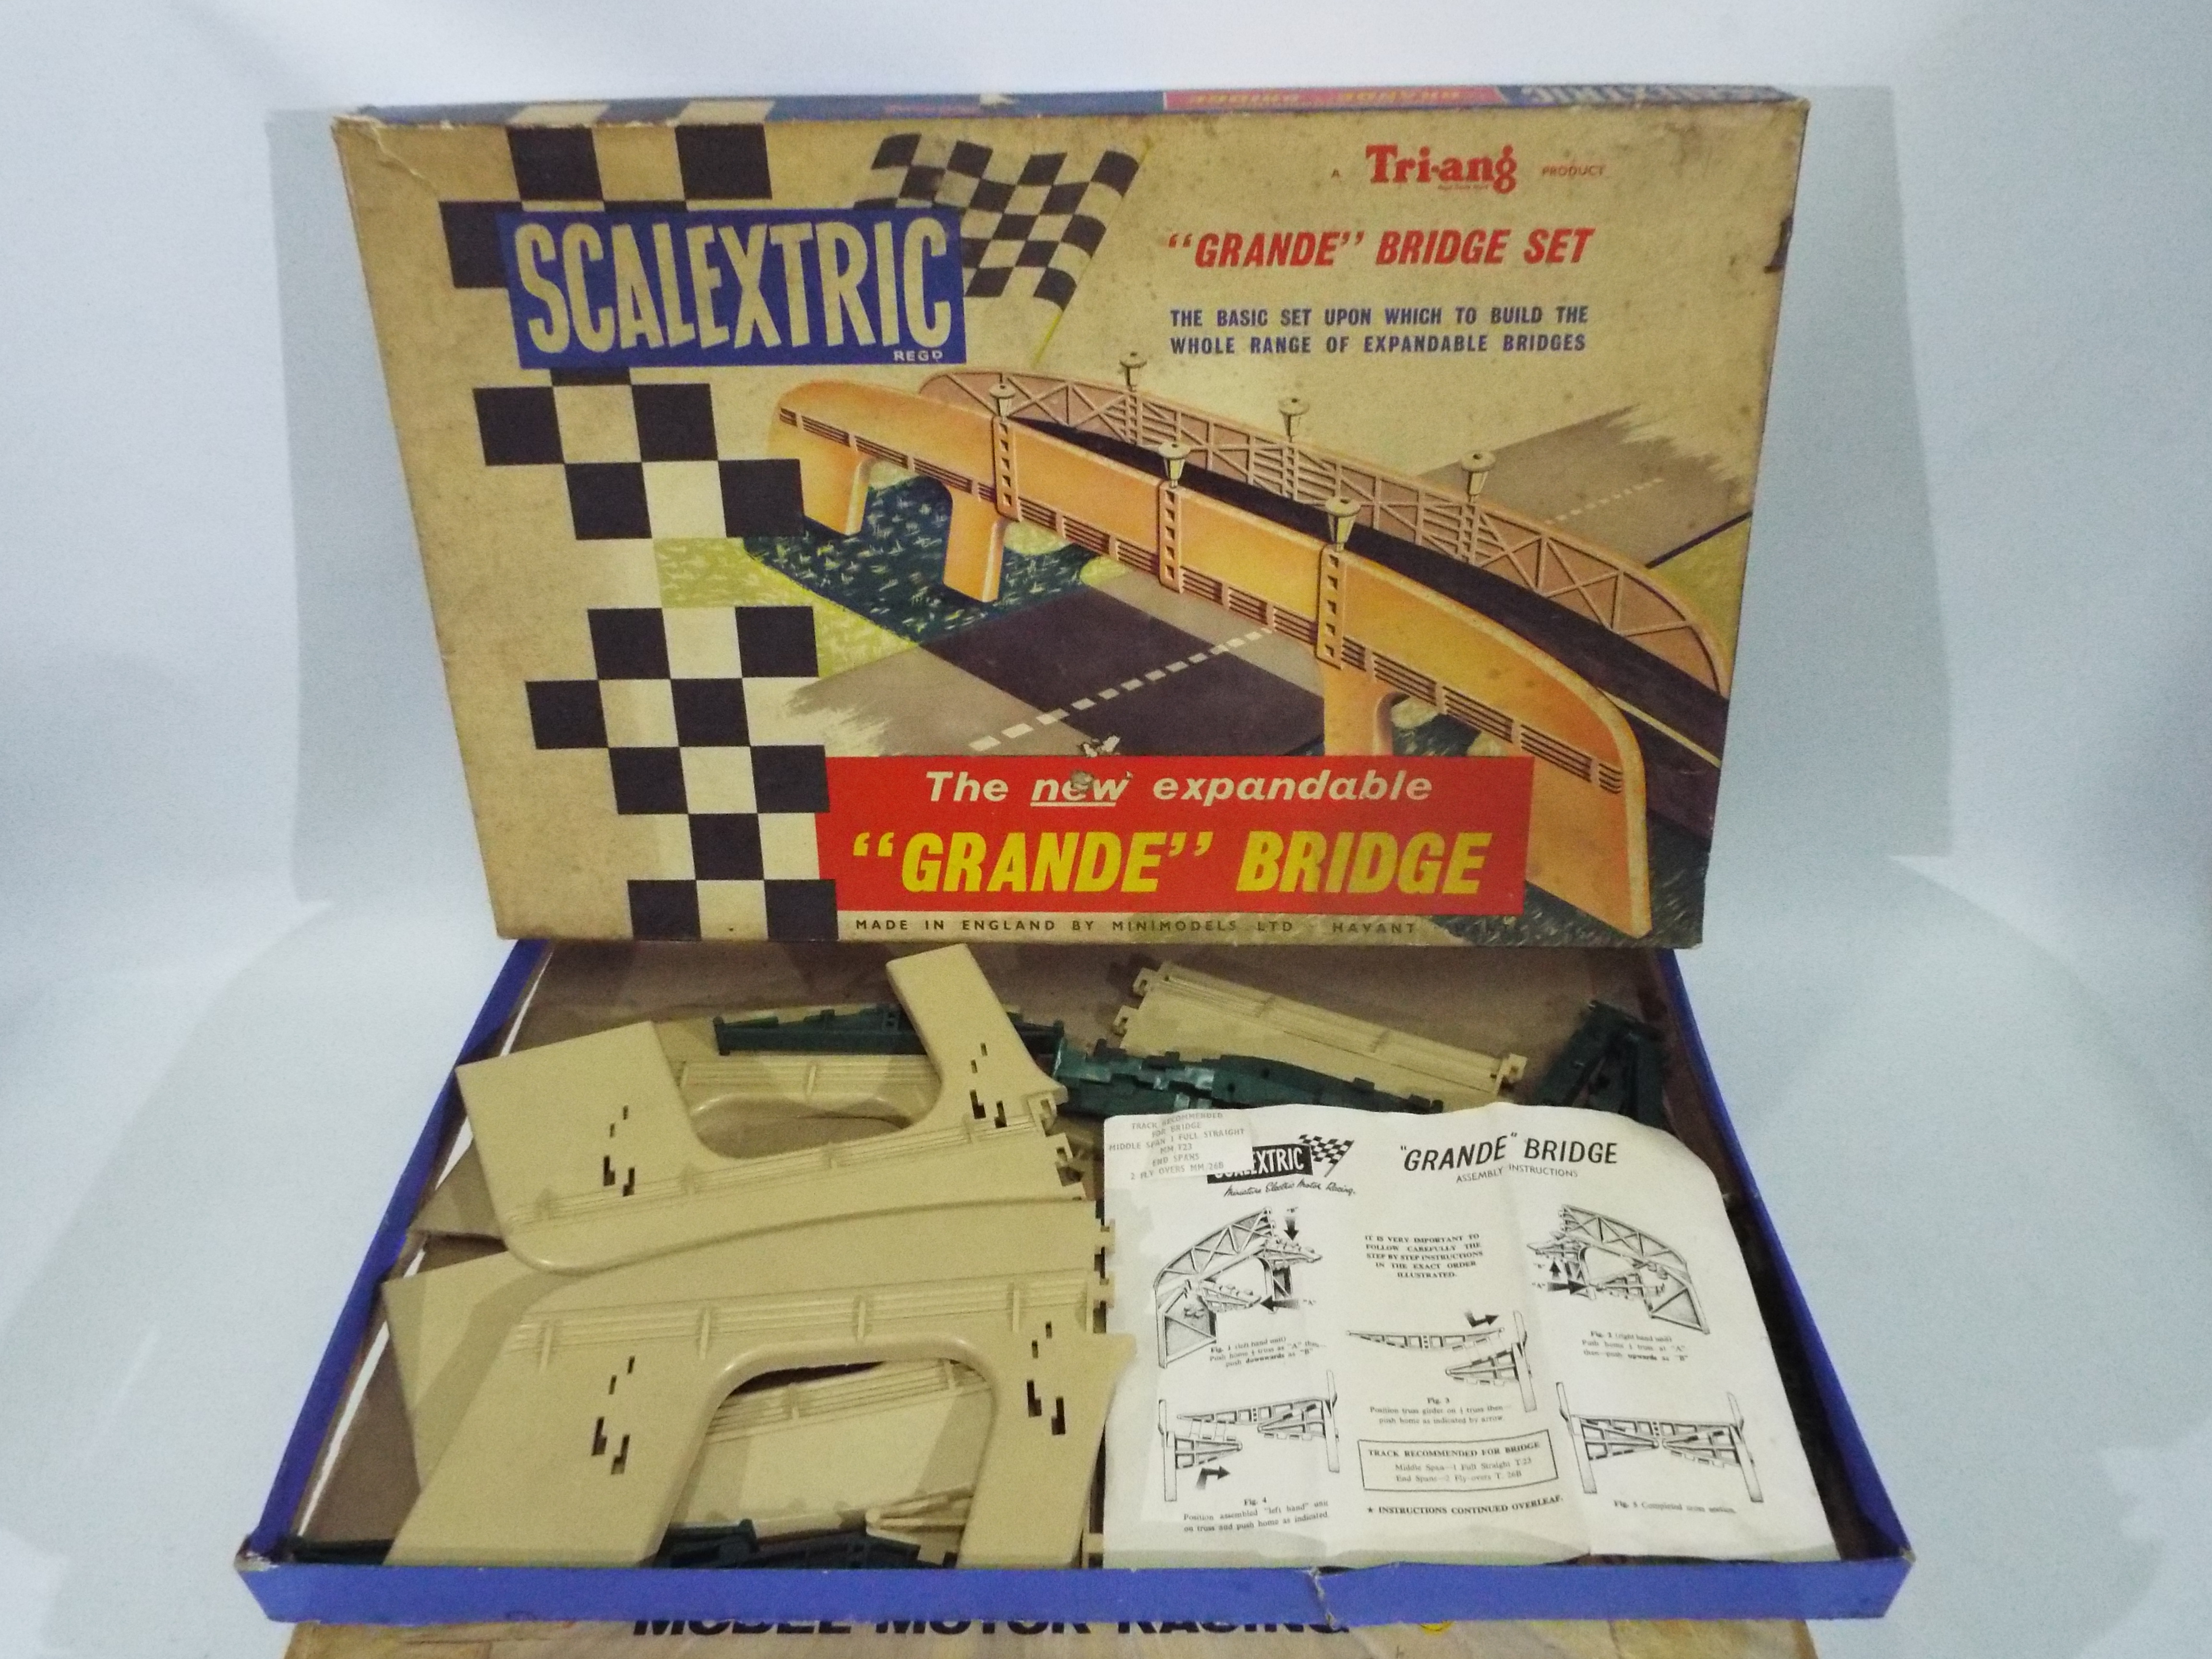 Scalextric - A vintage boxed Scalextric set and boxed Scalextric accessory. - Image 3 of 9